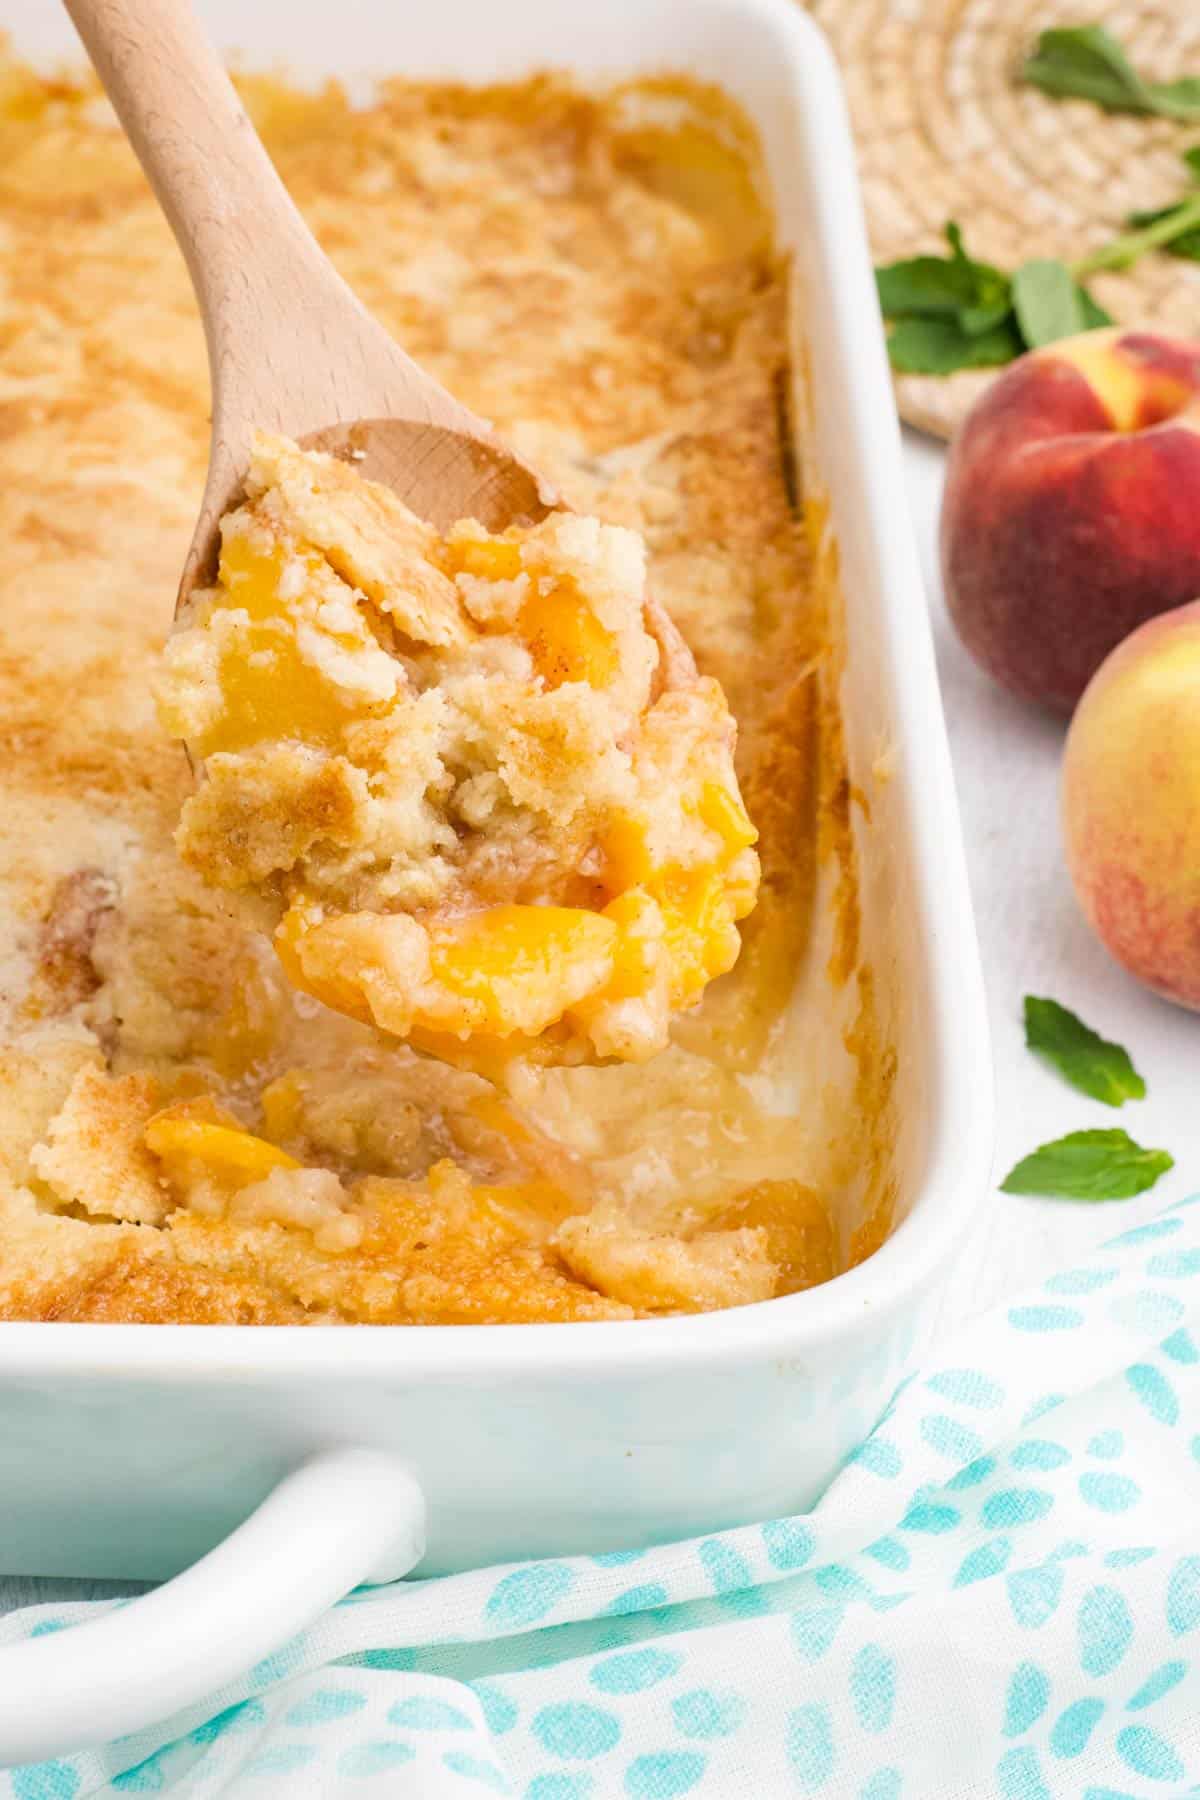 Peach dump cake with a wooden spoon scooping up a portion.